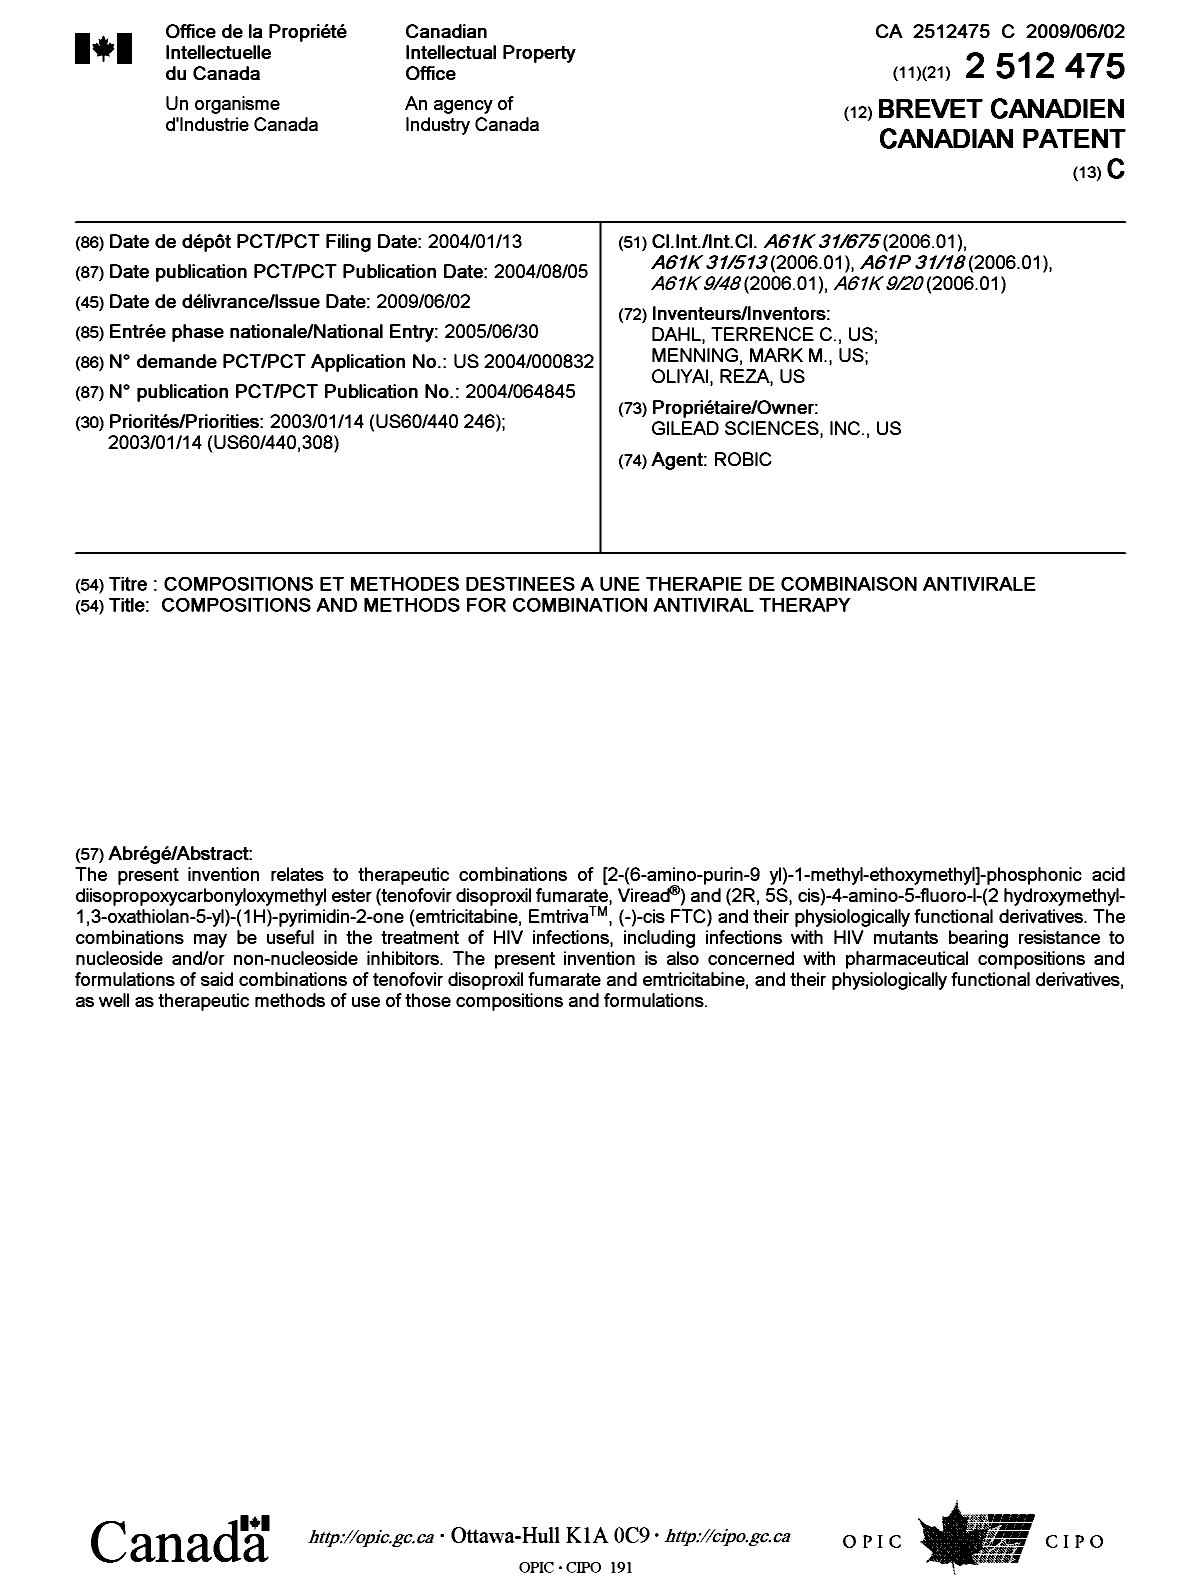 Canadian Patent Document 2512475. Cover Page 20081211. Image 1 of 1